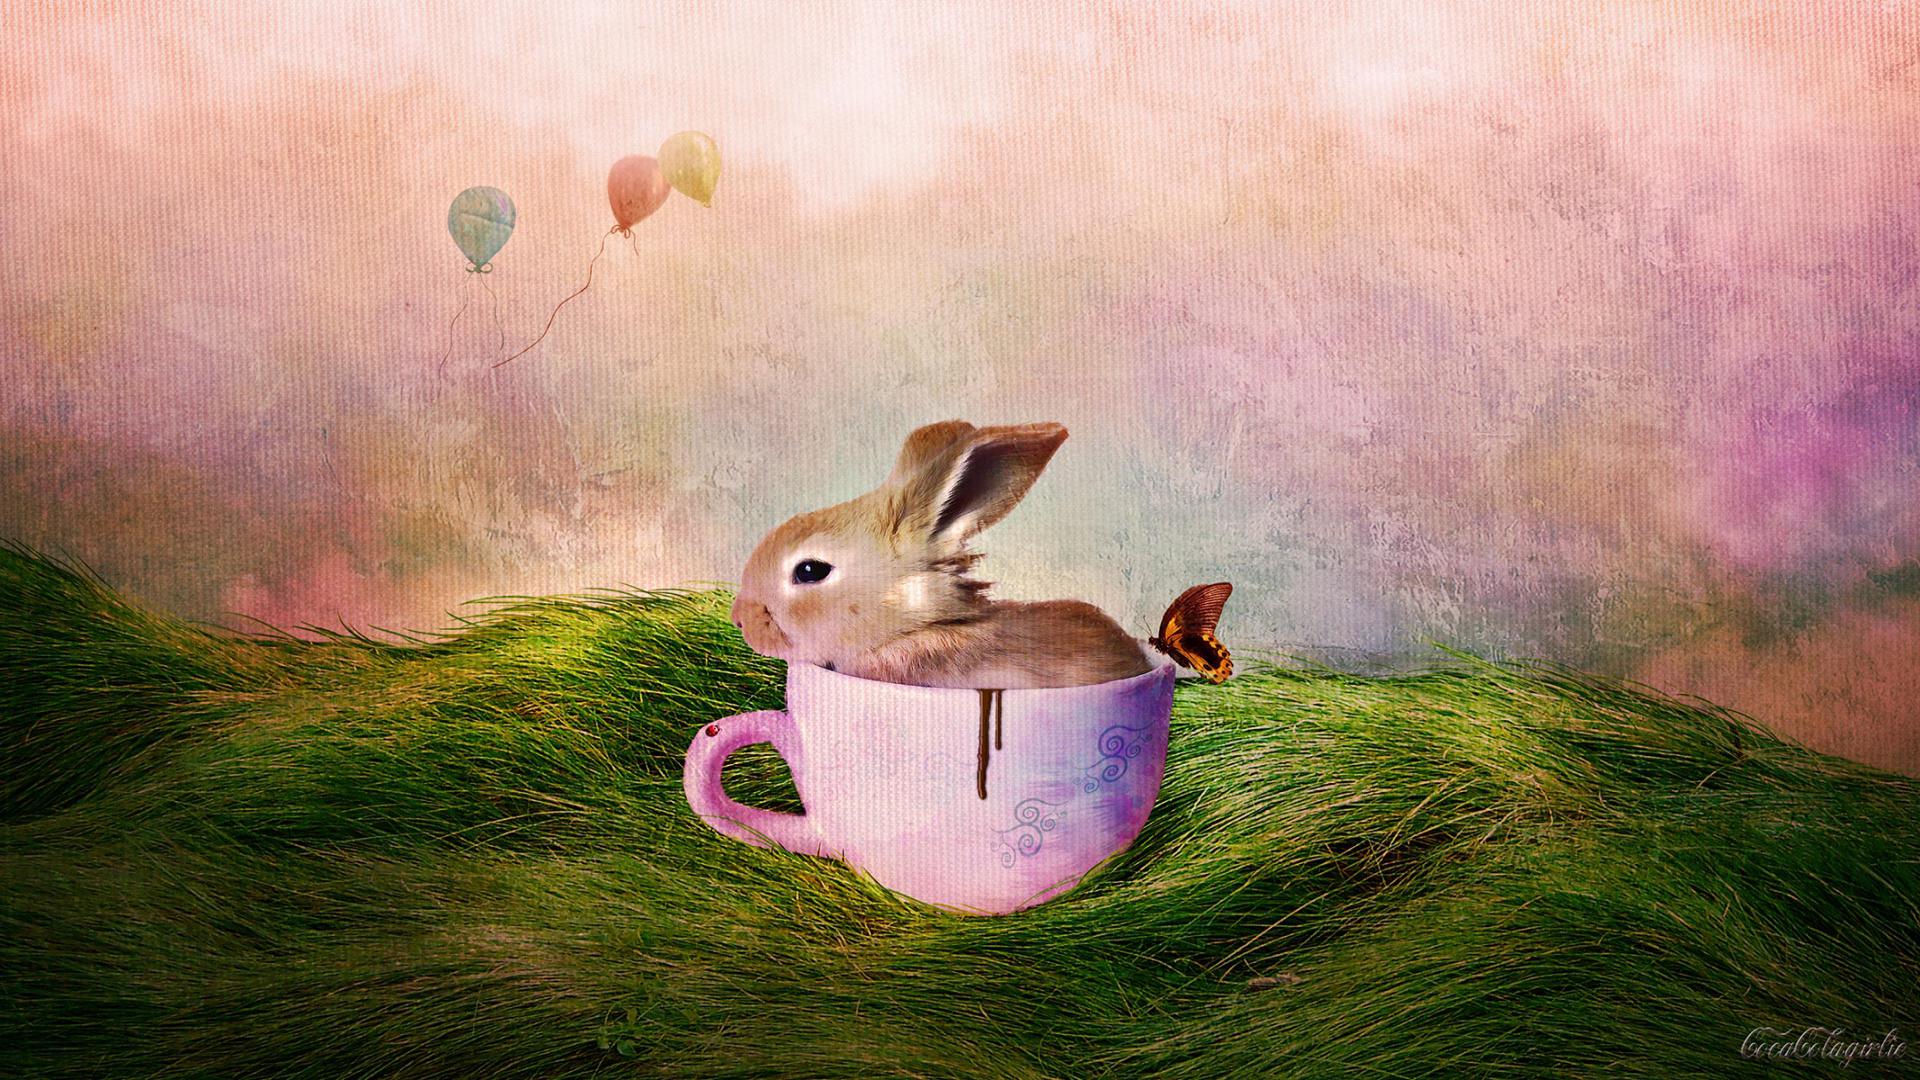 Artistic Balloon Bunny Cup Easter Grass Holiday Painting 1920x1080